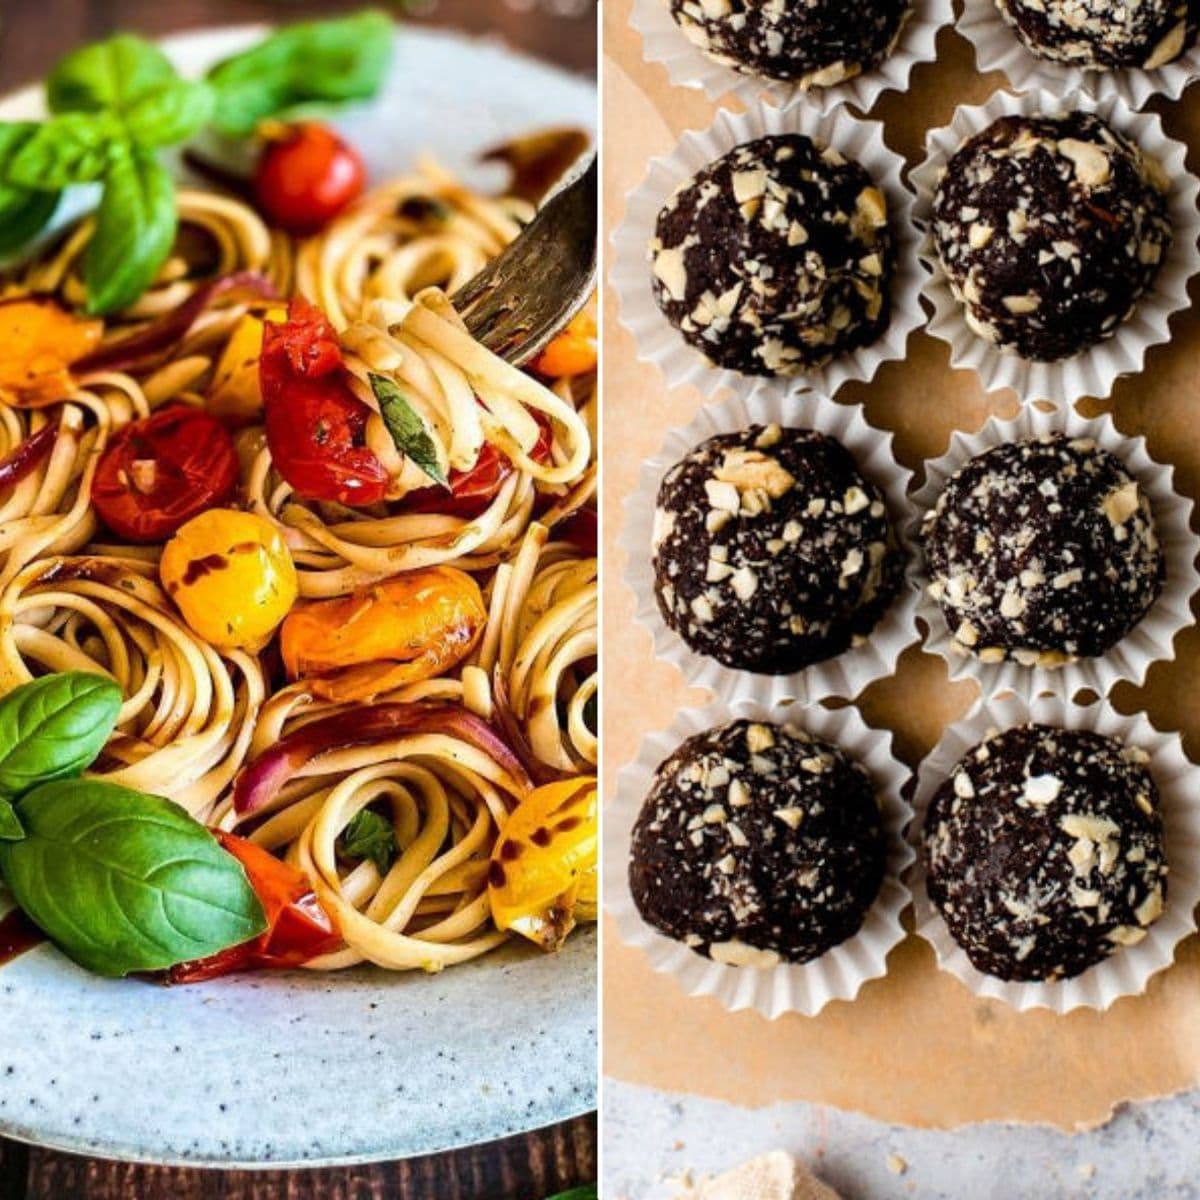 healthy pasta on one side of the image and chocolate truffles on the other